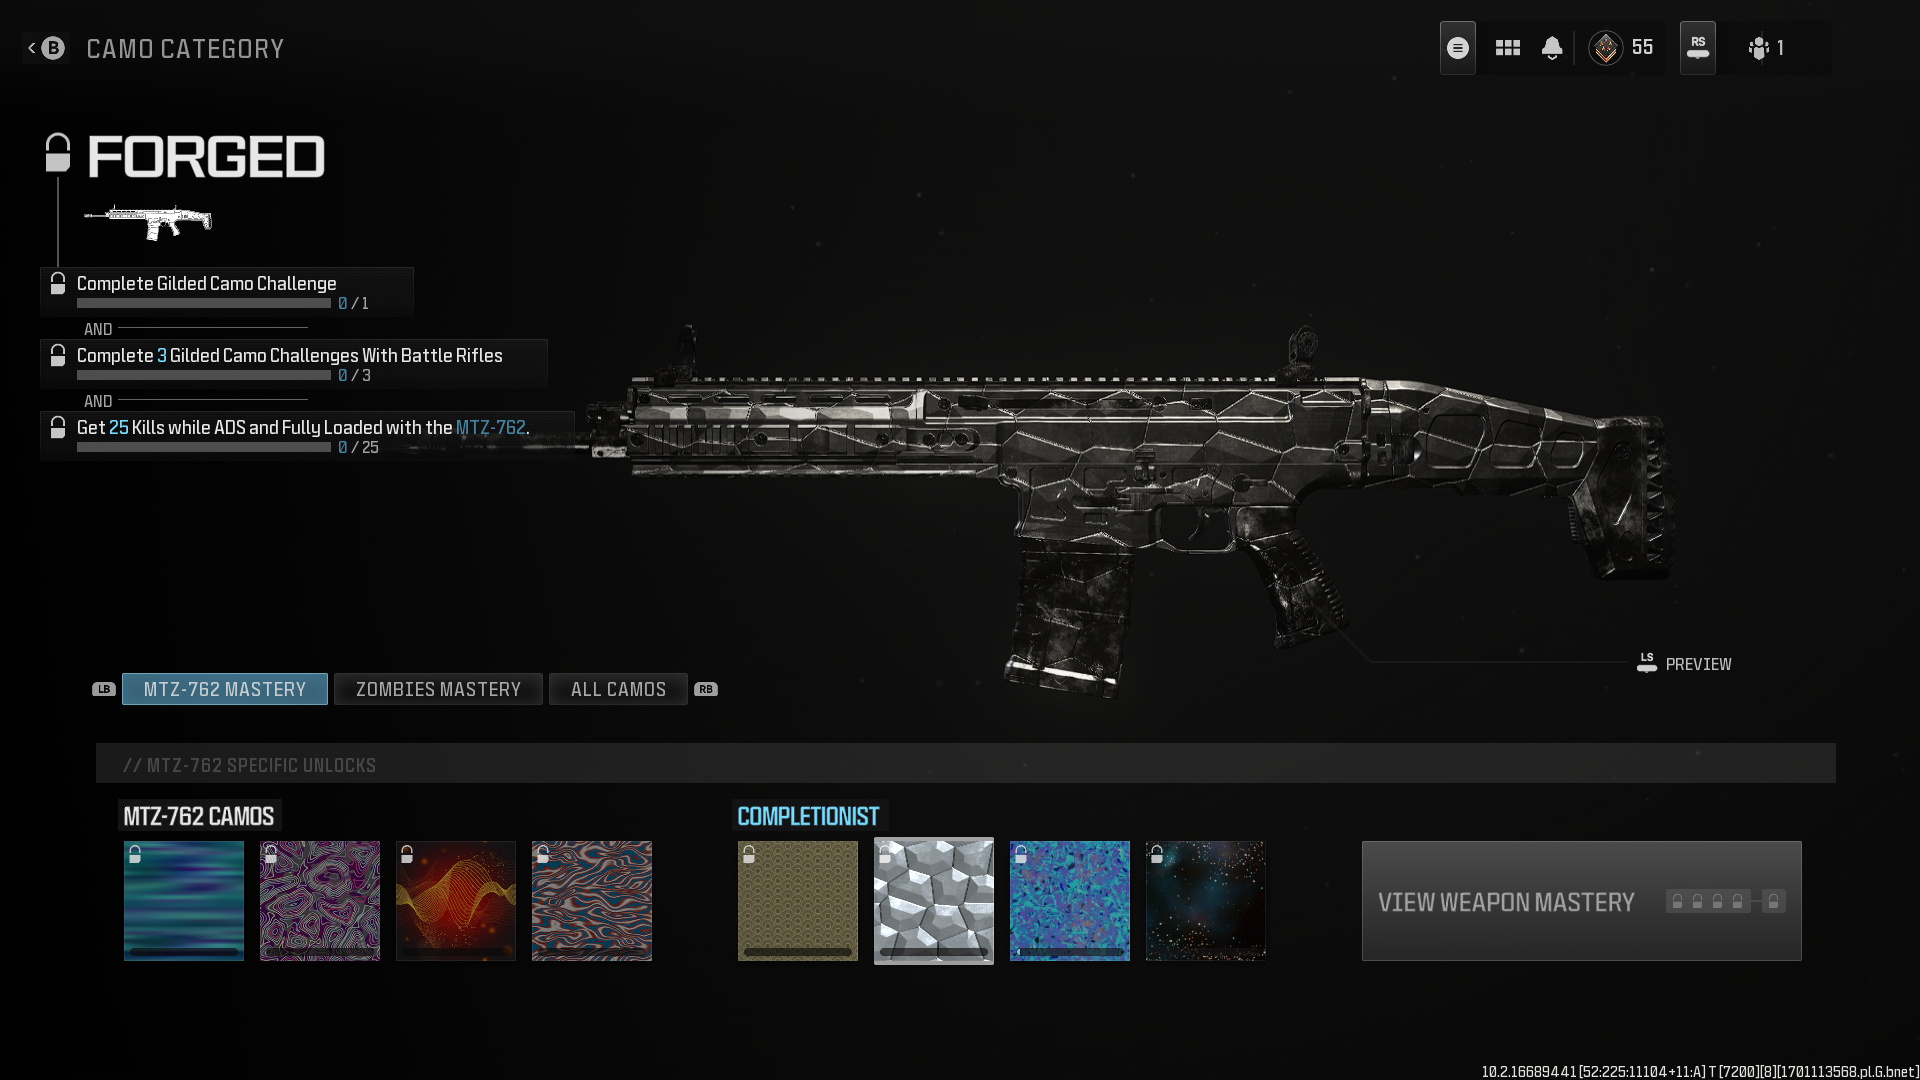 A screenshot showing the Forged camo challenge screen for the MTZ-762 in MW3.